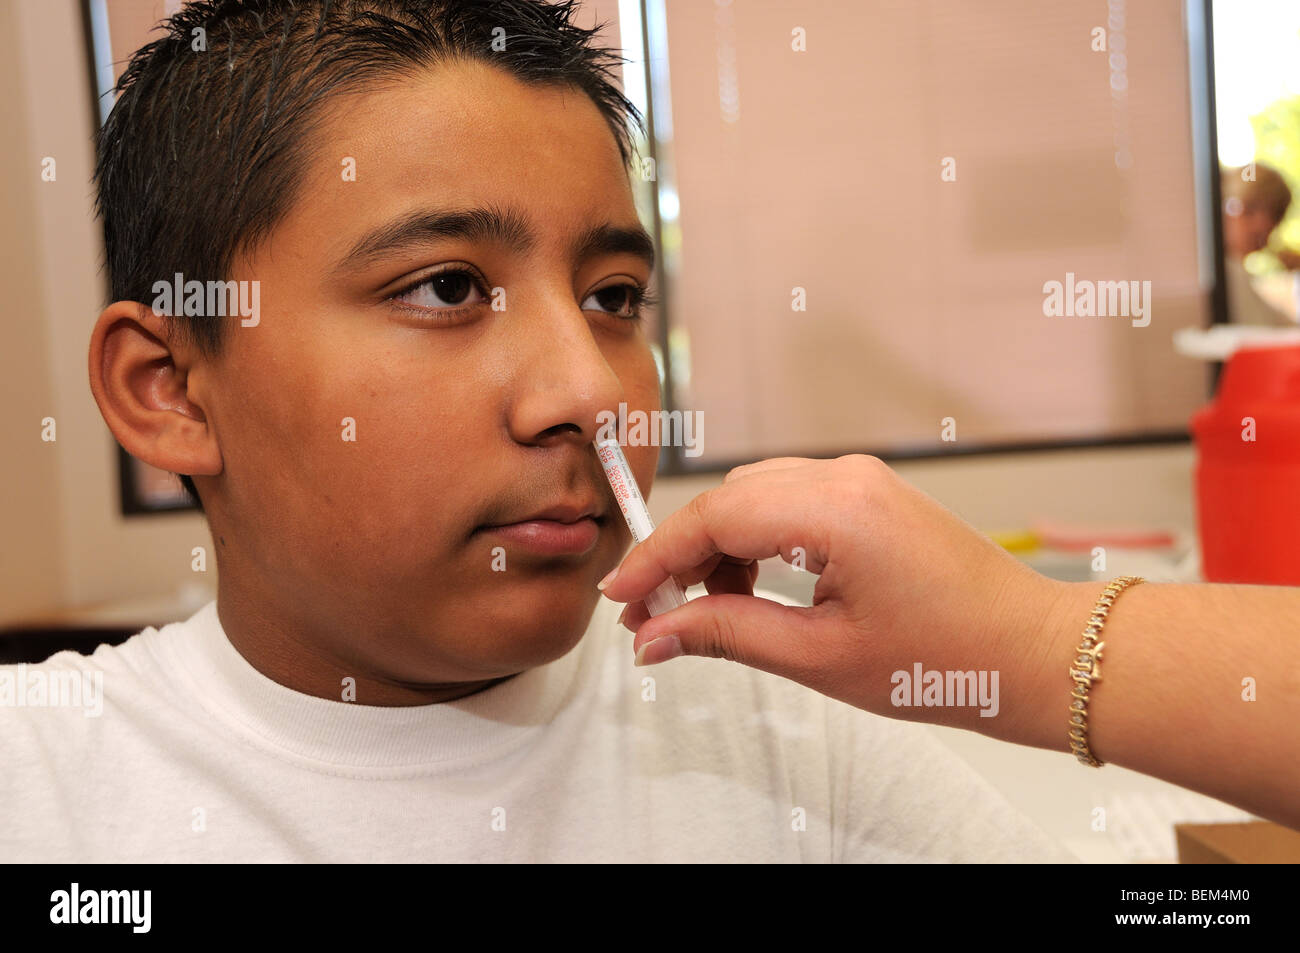 A 12-year-old boy is vaccinated for the 2009 H1N1 influenza, also known as the Swine Flu, with an intranasal vaccine. Stock Photo